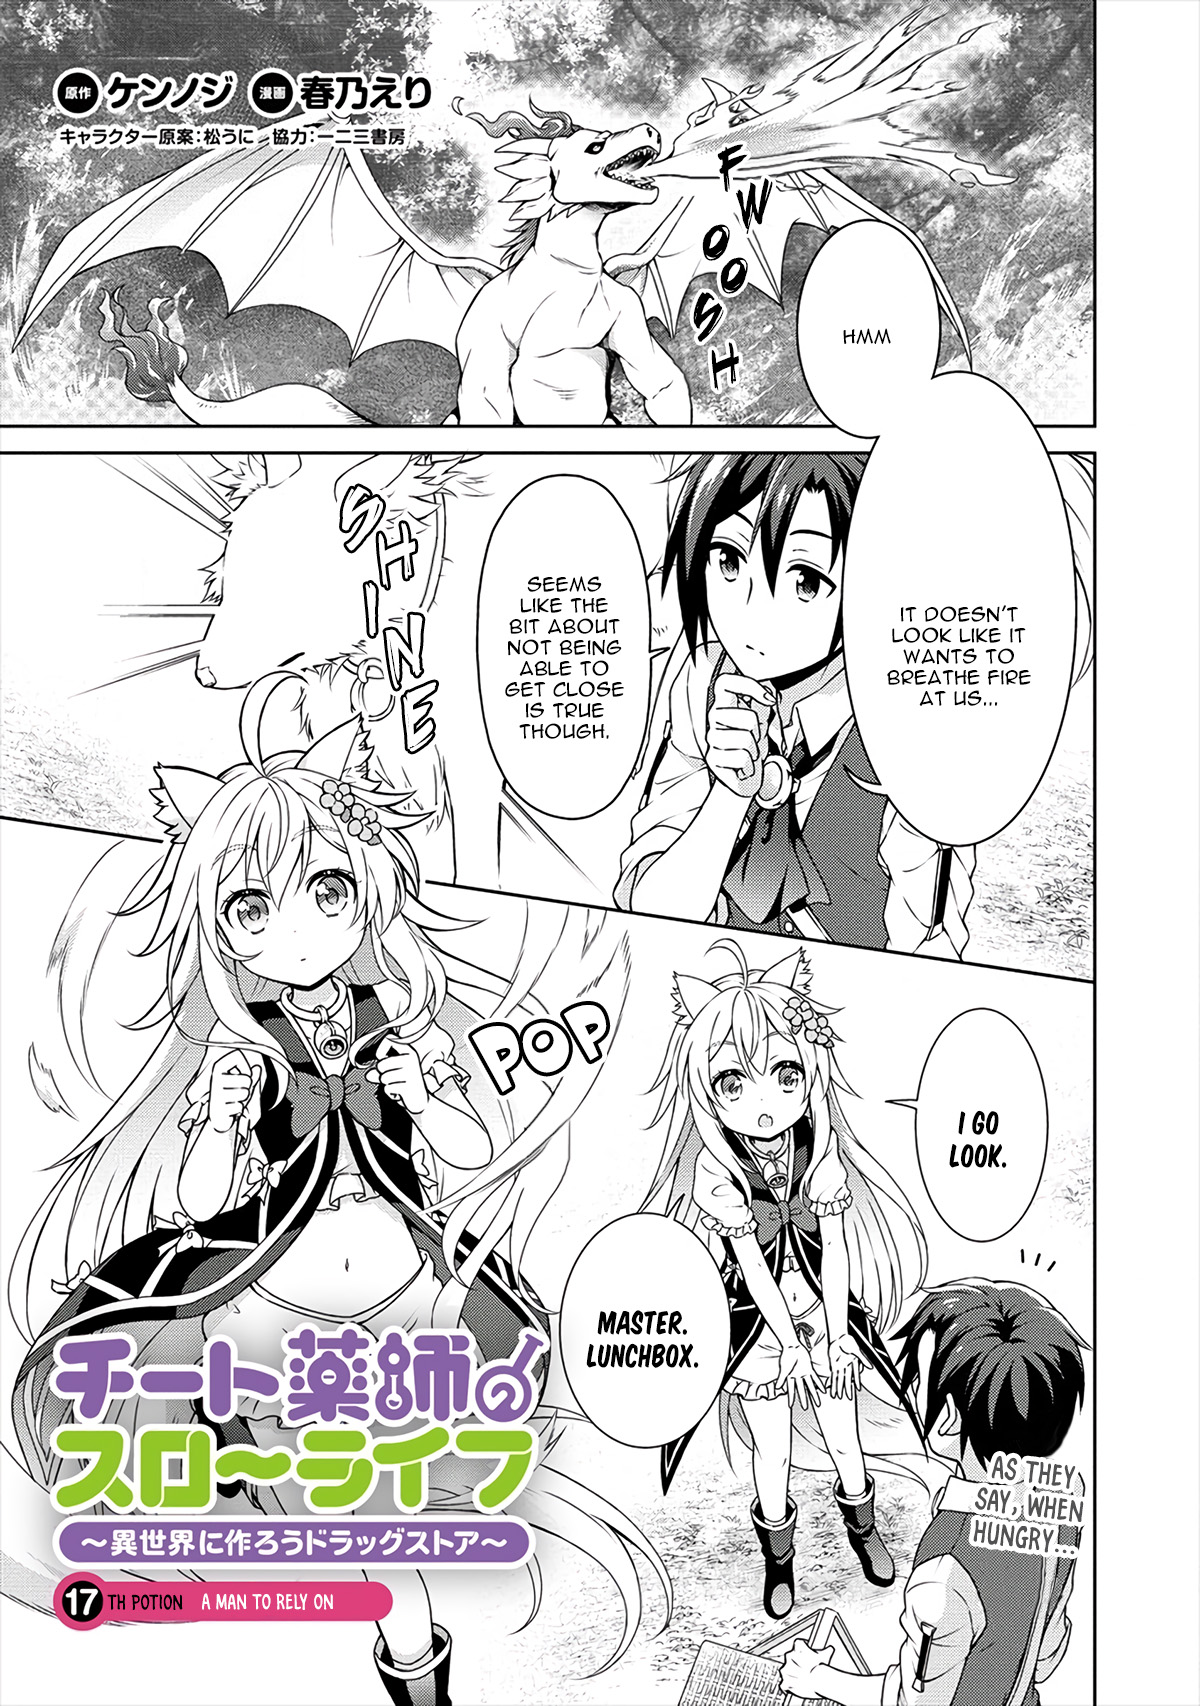 Cheat Kusushi No Slow Life: Isekai Ni Tsukurou Drugstore Vol.4 Chapter 17: A Man To Rely On (Part 1) - Picture 2